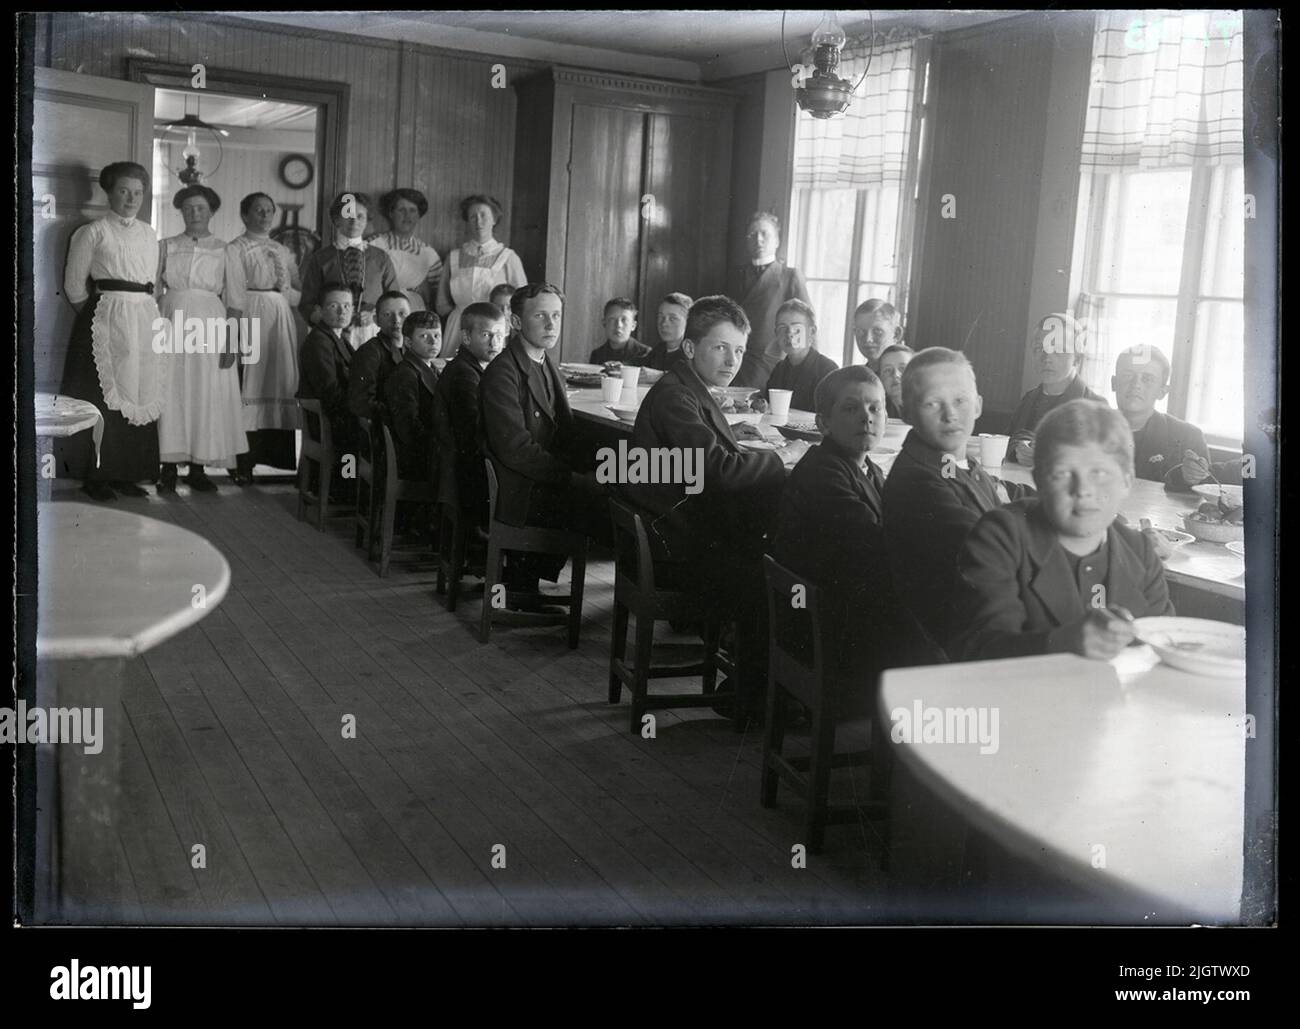 Food Day at Gustafsbergs Barnhus Gustafsbergs Barnhus, around 1912. The teacher who is visible is Pastor Linder. Among the students: the artists Nils Amech and David Larsson (1898 - 1976). The latter is counted as one of the Gothenburg schools even though he did not study under Tor Bjurström's leadership at Valand's art school, Gothenburg. The building in the Gustafsberg area, which in the 21st century is called the mansion. In 1854, the former schoolhouse was converted into kitchens and dining rooms. Stock Photo